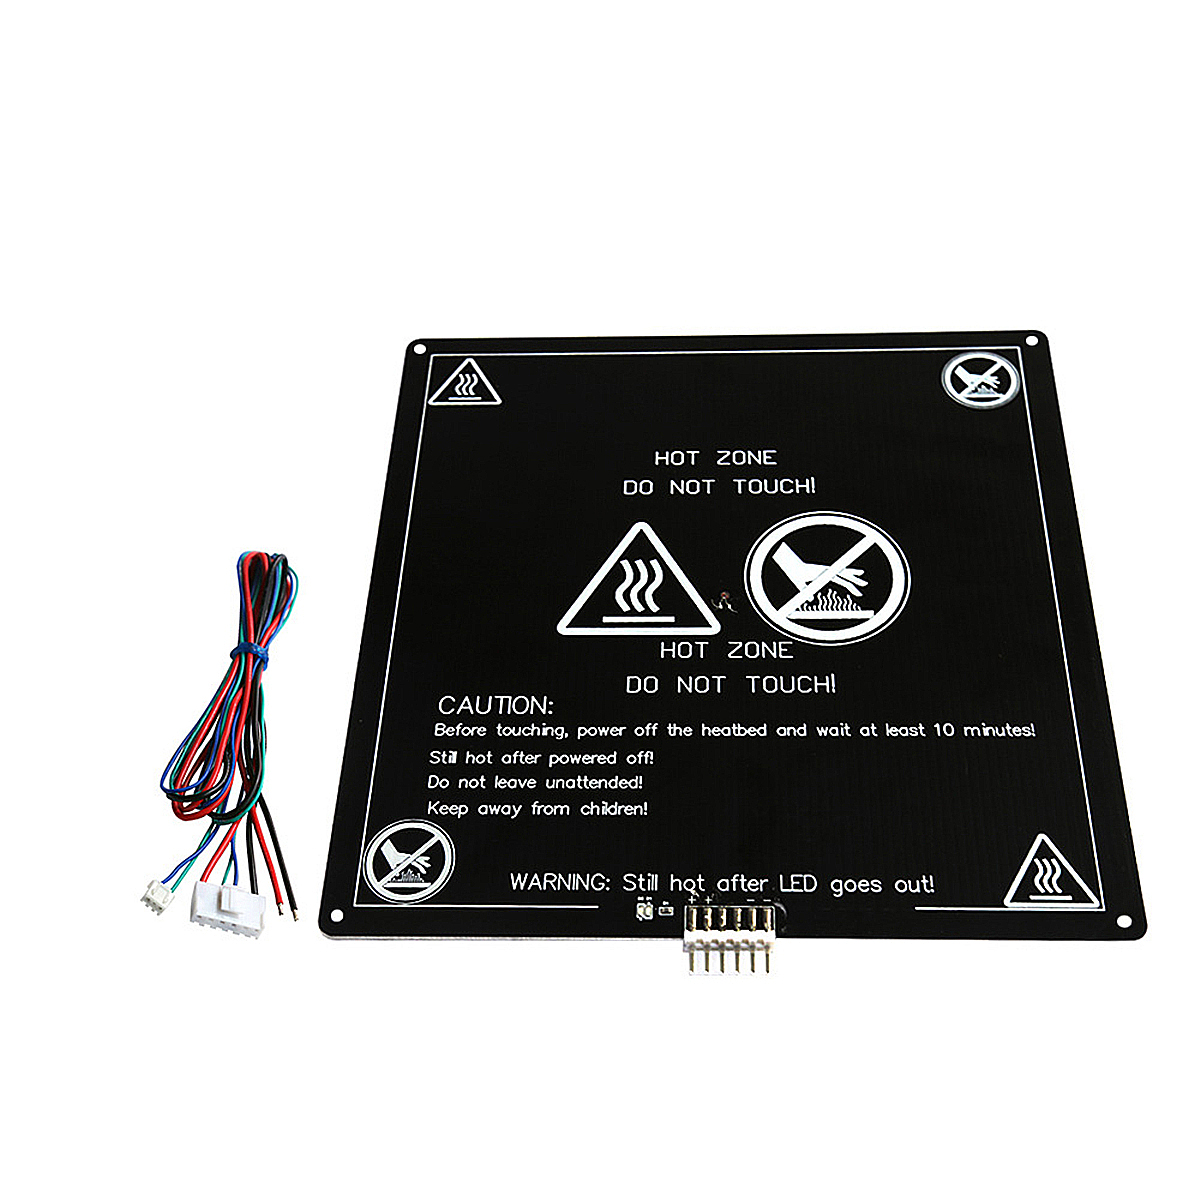 Anetreg-220x220x3mm-120W-12V-MK3-Aluminum-Board-PCB-Heated-Bed-With-Wire-For-3D-Printer-1975604-1